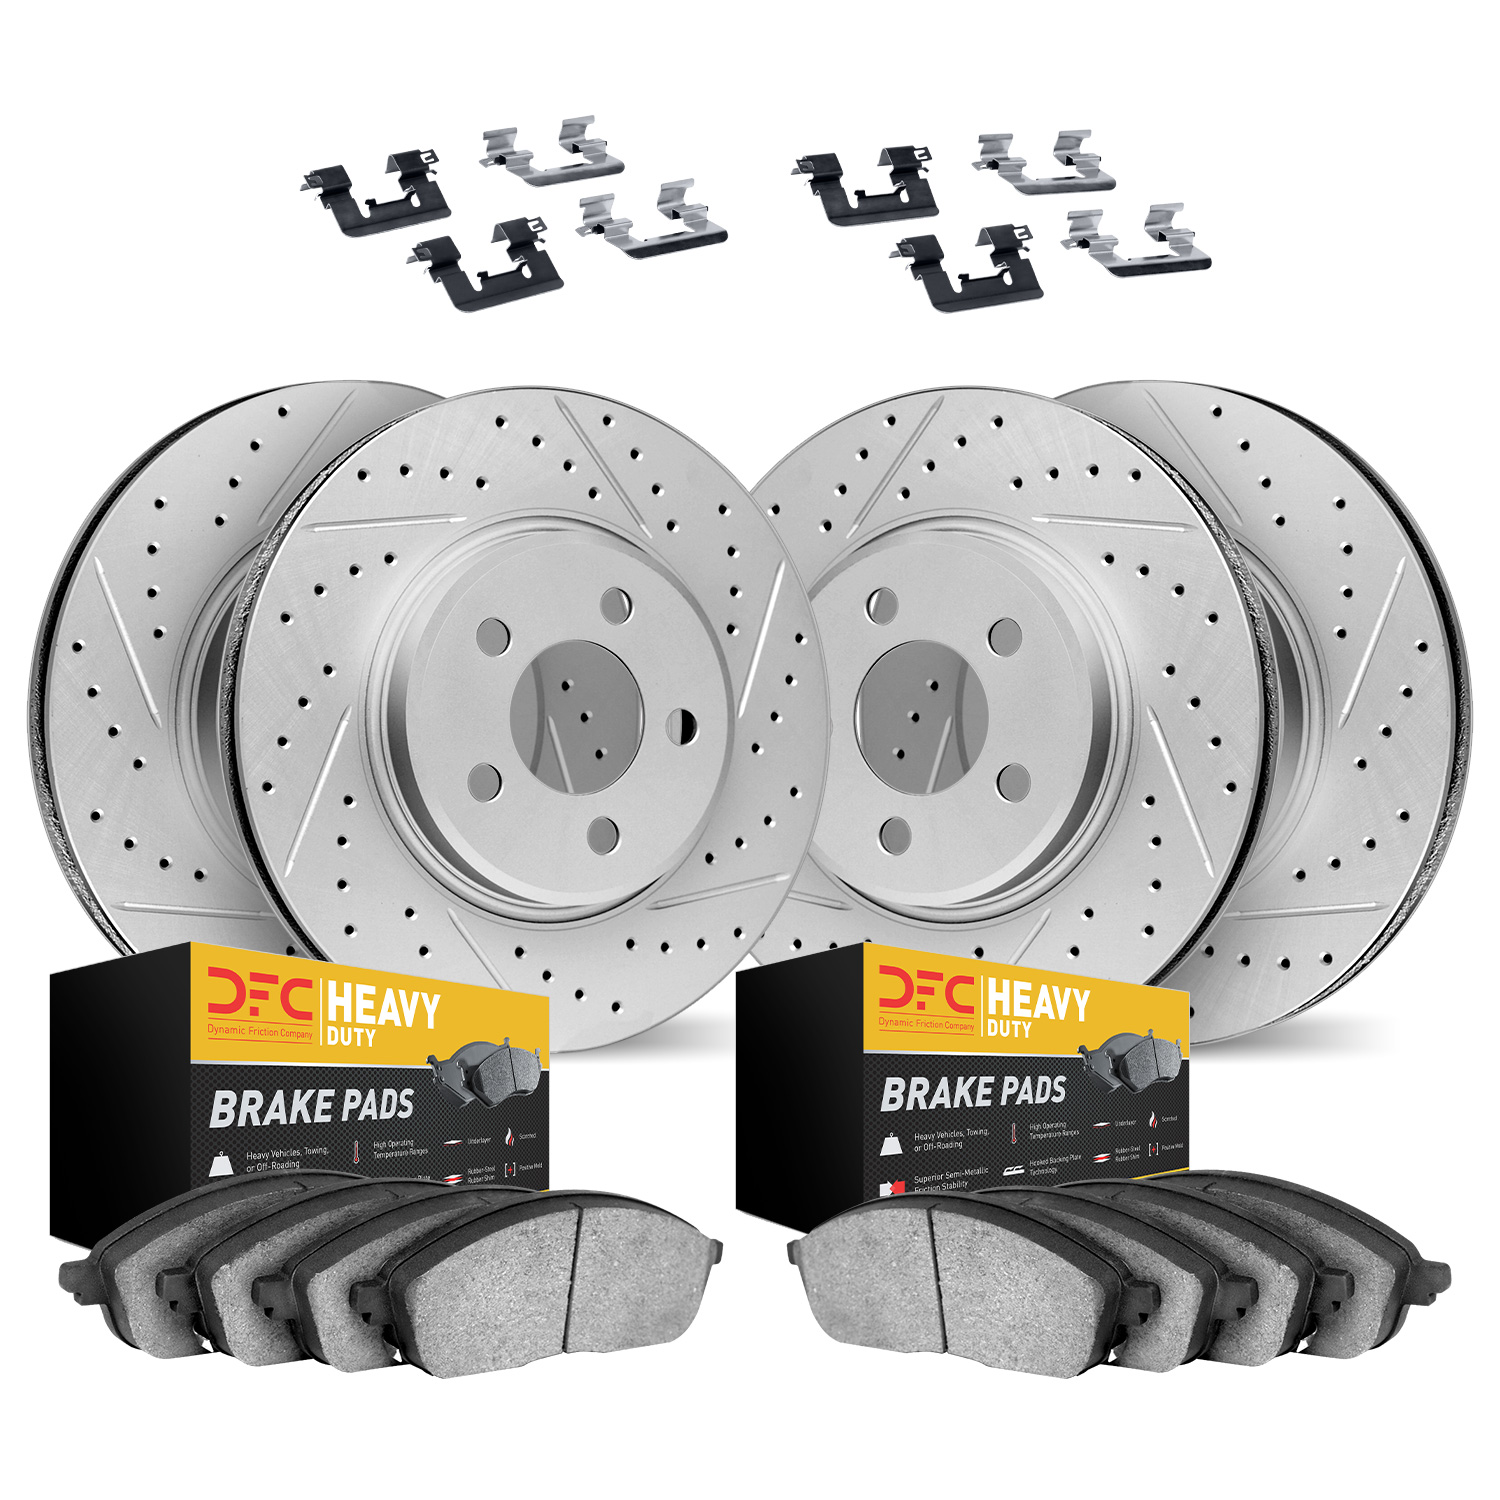 2214-99113 Geoperformance Drilled/Slotted Rotors w/Heavy-Duty Pads Kit & Hardware, 2013-2016 Ford/Lincoln/Mercury/Mazda, Positio